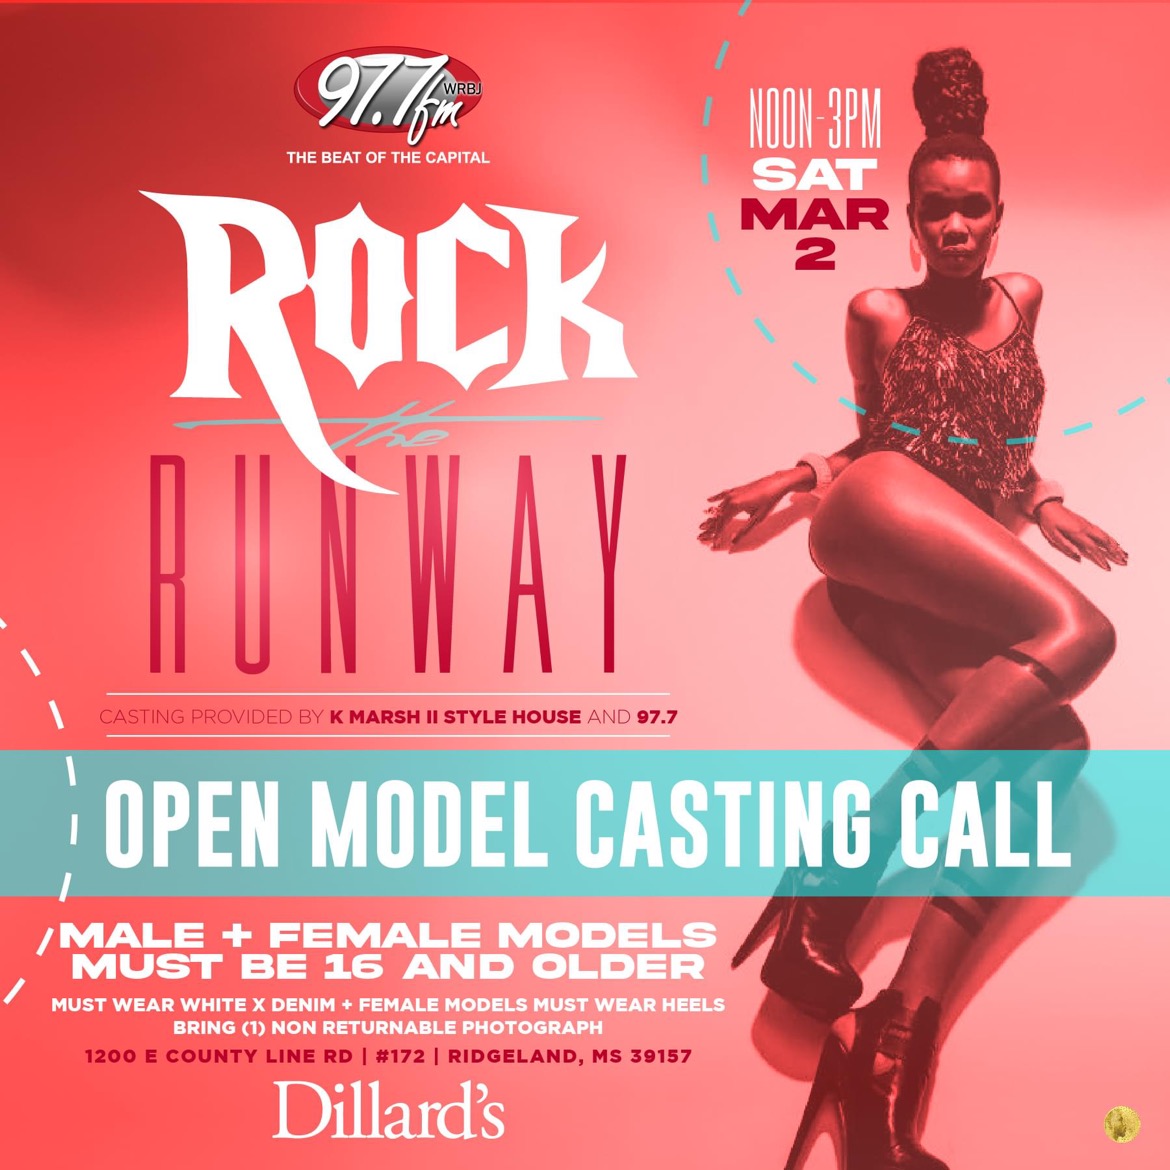 Jackson, MS! @977FM's premier fashion show Rock the Runway is back! The official Open Model Casting Call for 97.7's Rock the Runway is this Saturday March 2nd at Dillard's Northpark 12 Noon -3pm. Female & male models needed! #JacksonMS #977RocktheRunway #CastingCall #models